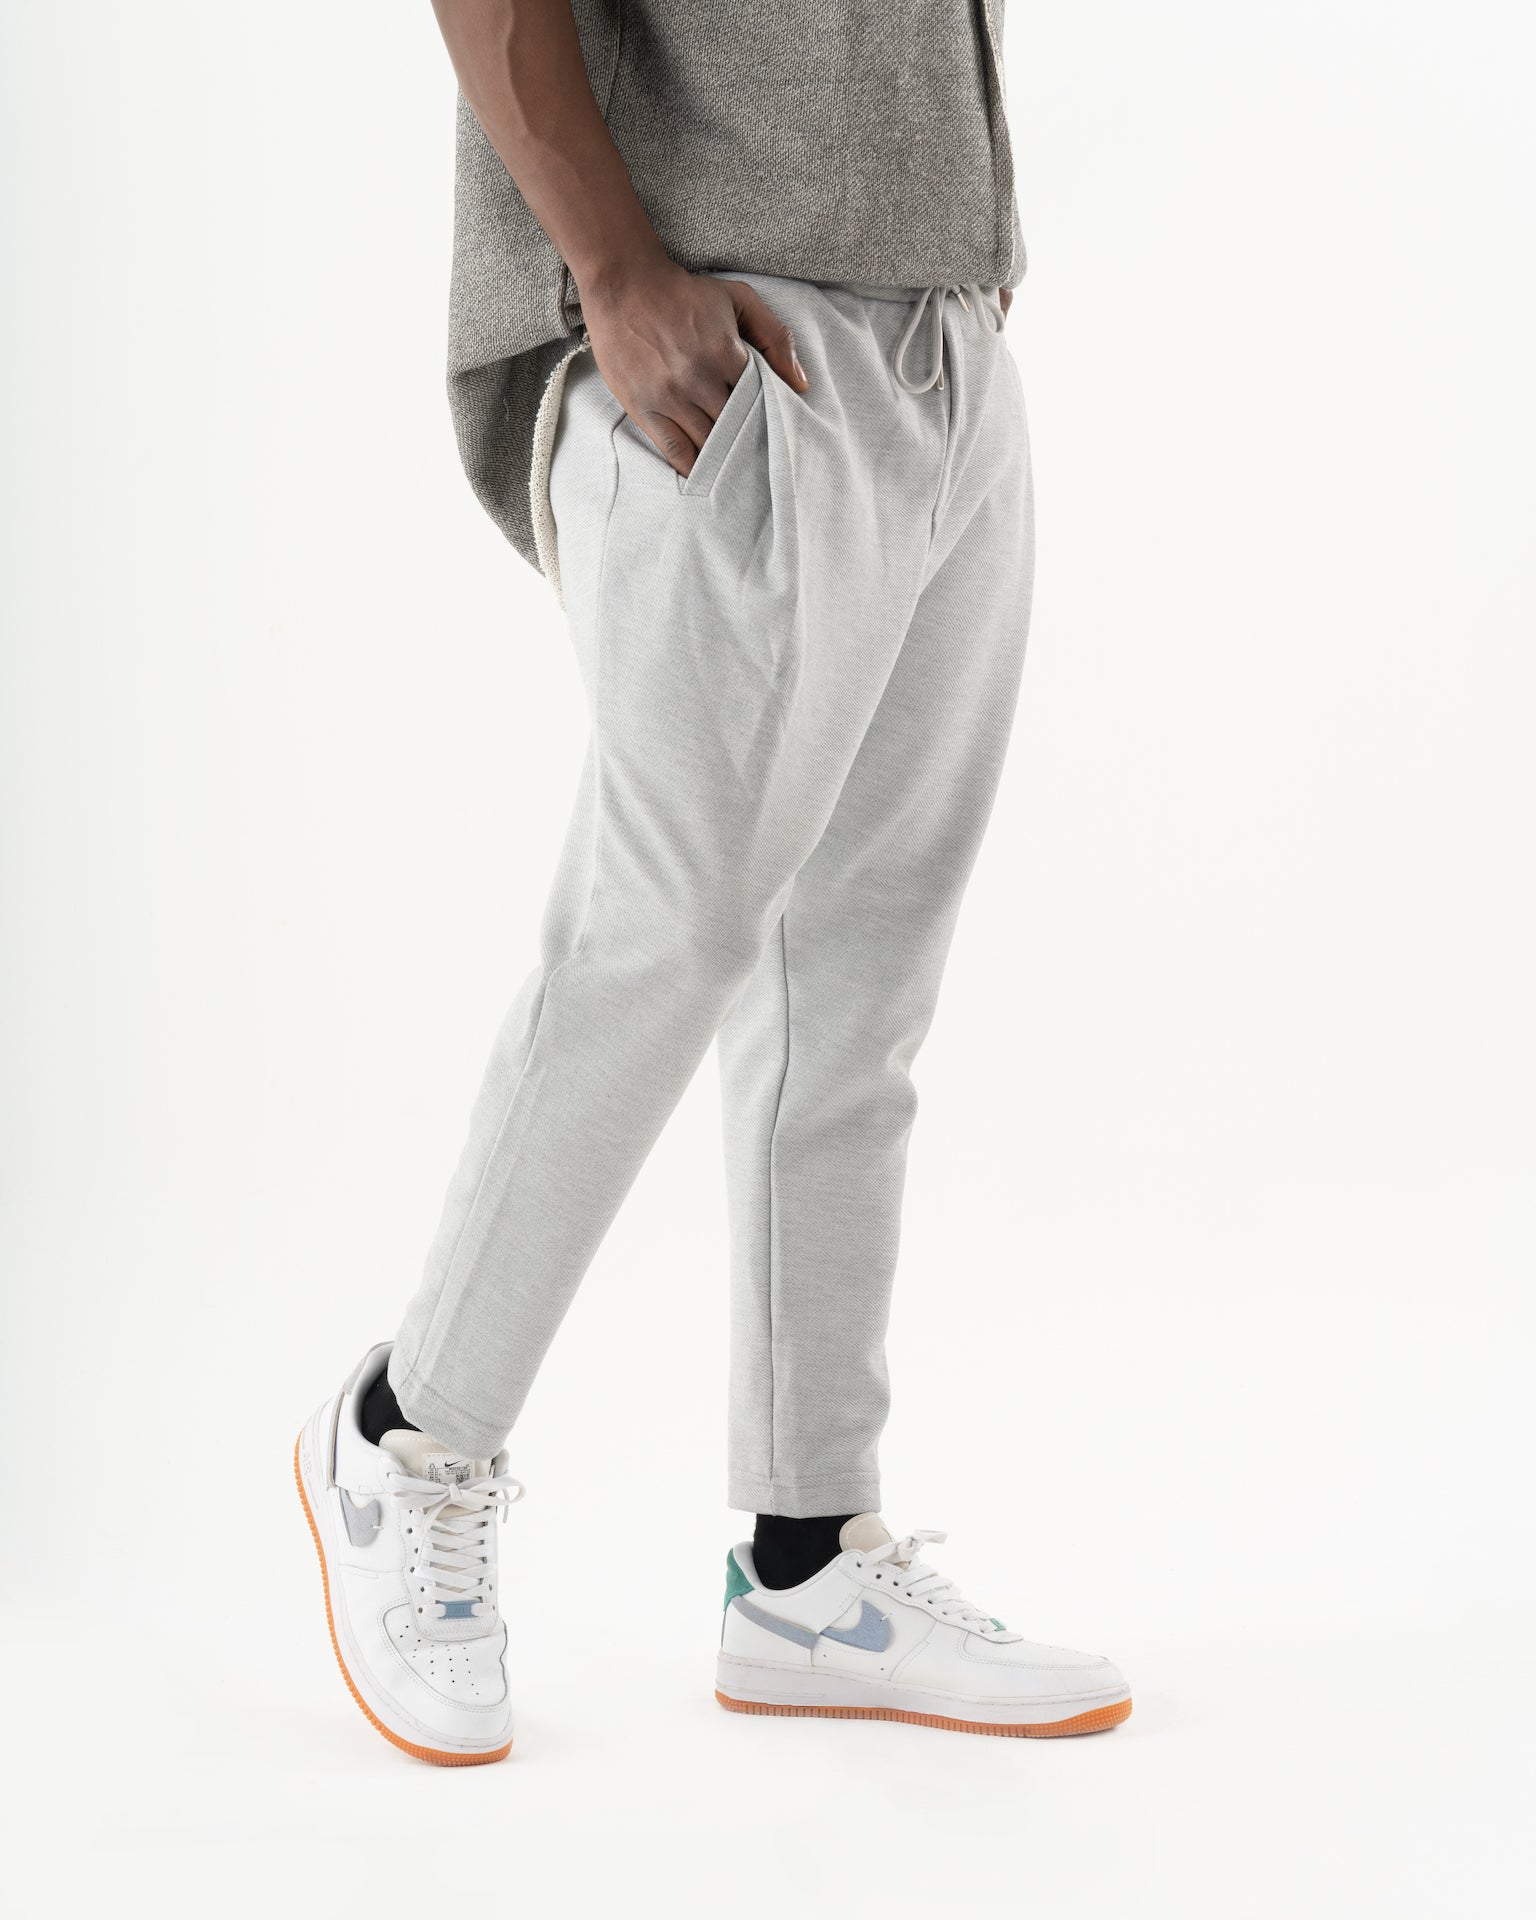 A man donning cozy SERENE JOGGERS and comfortable sneakers in his everyday wear.